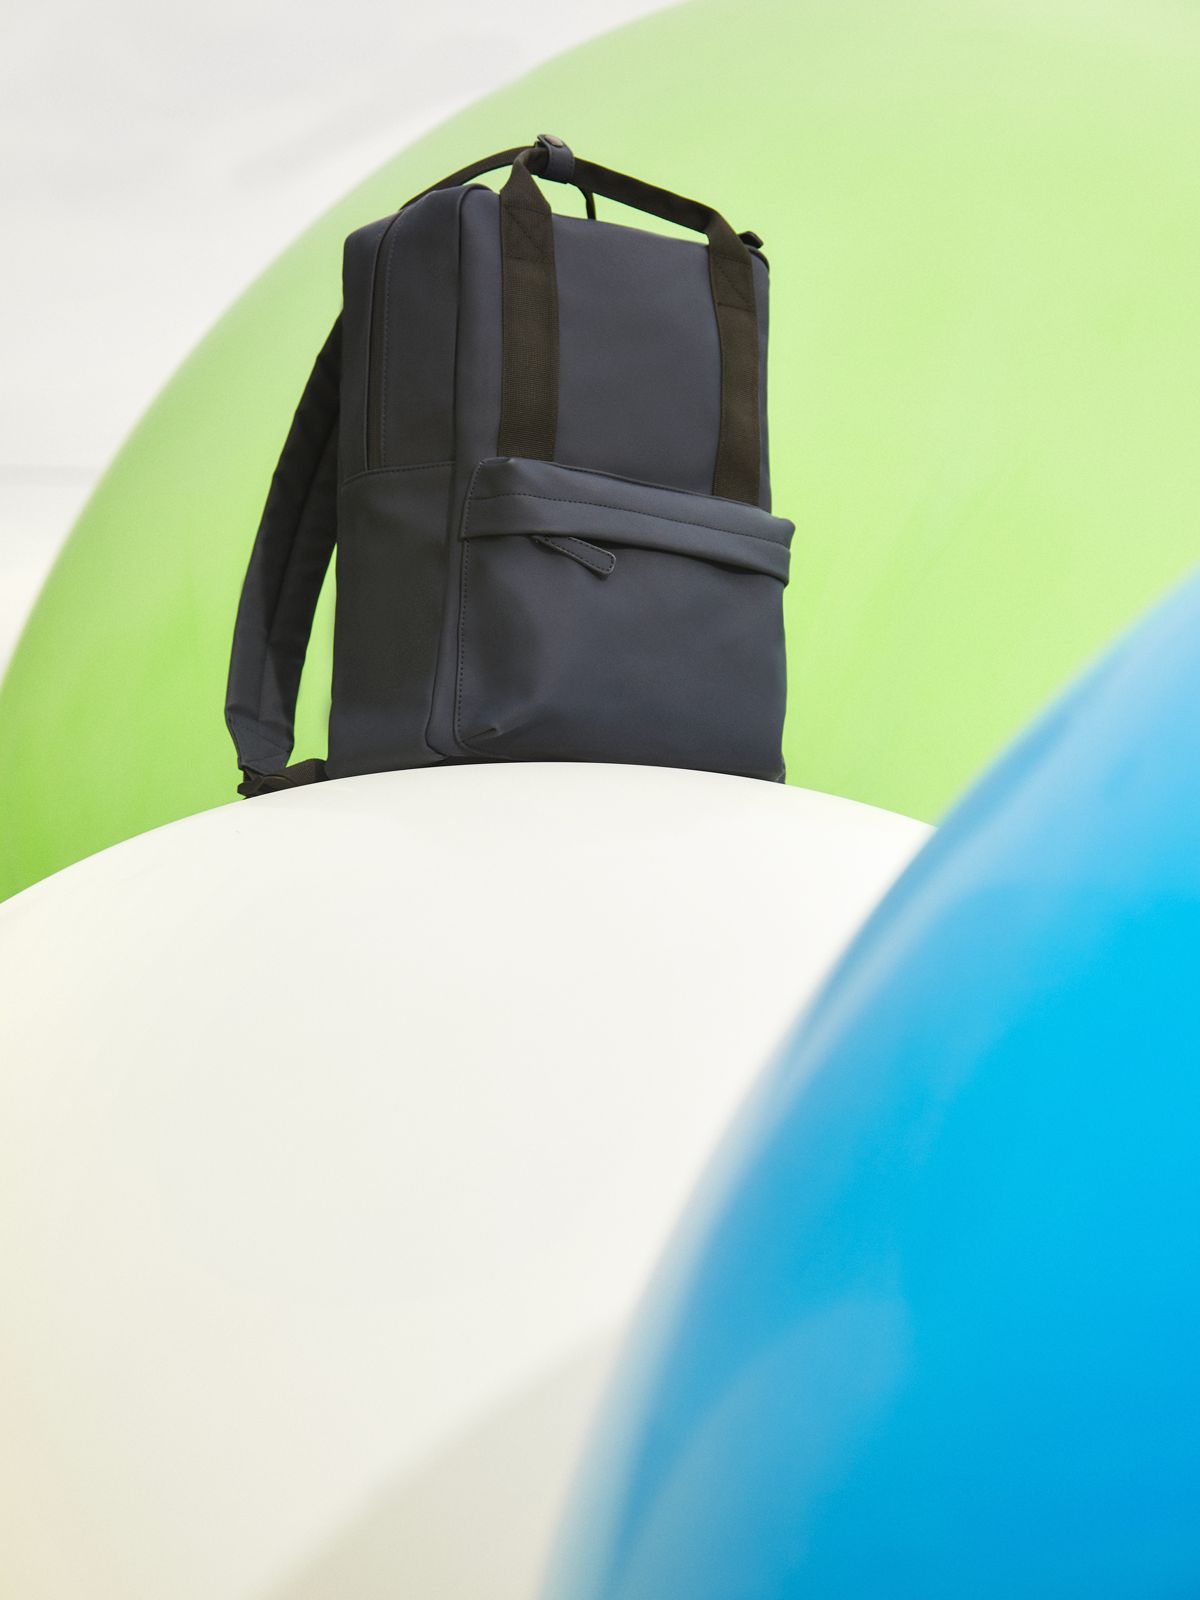 Image of a school bag on top of an inflatable ball